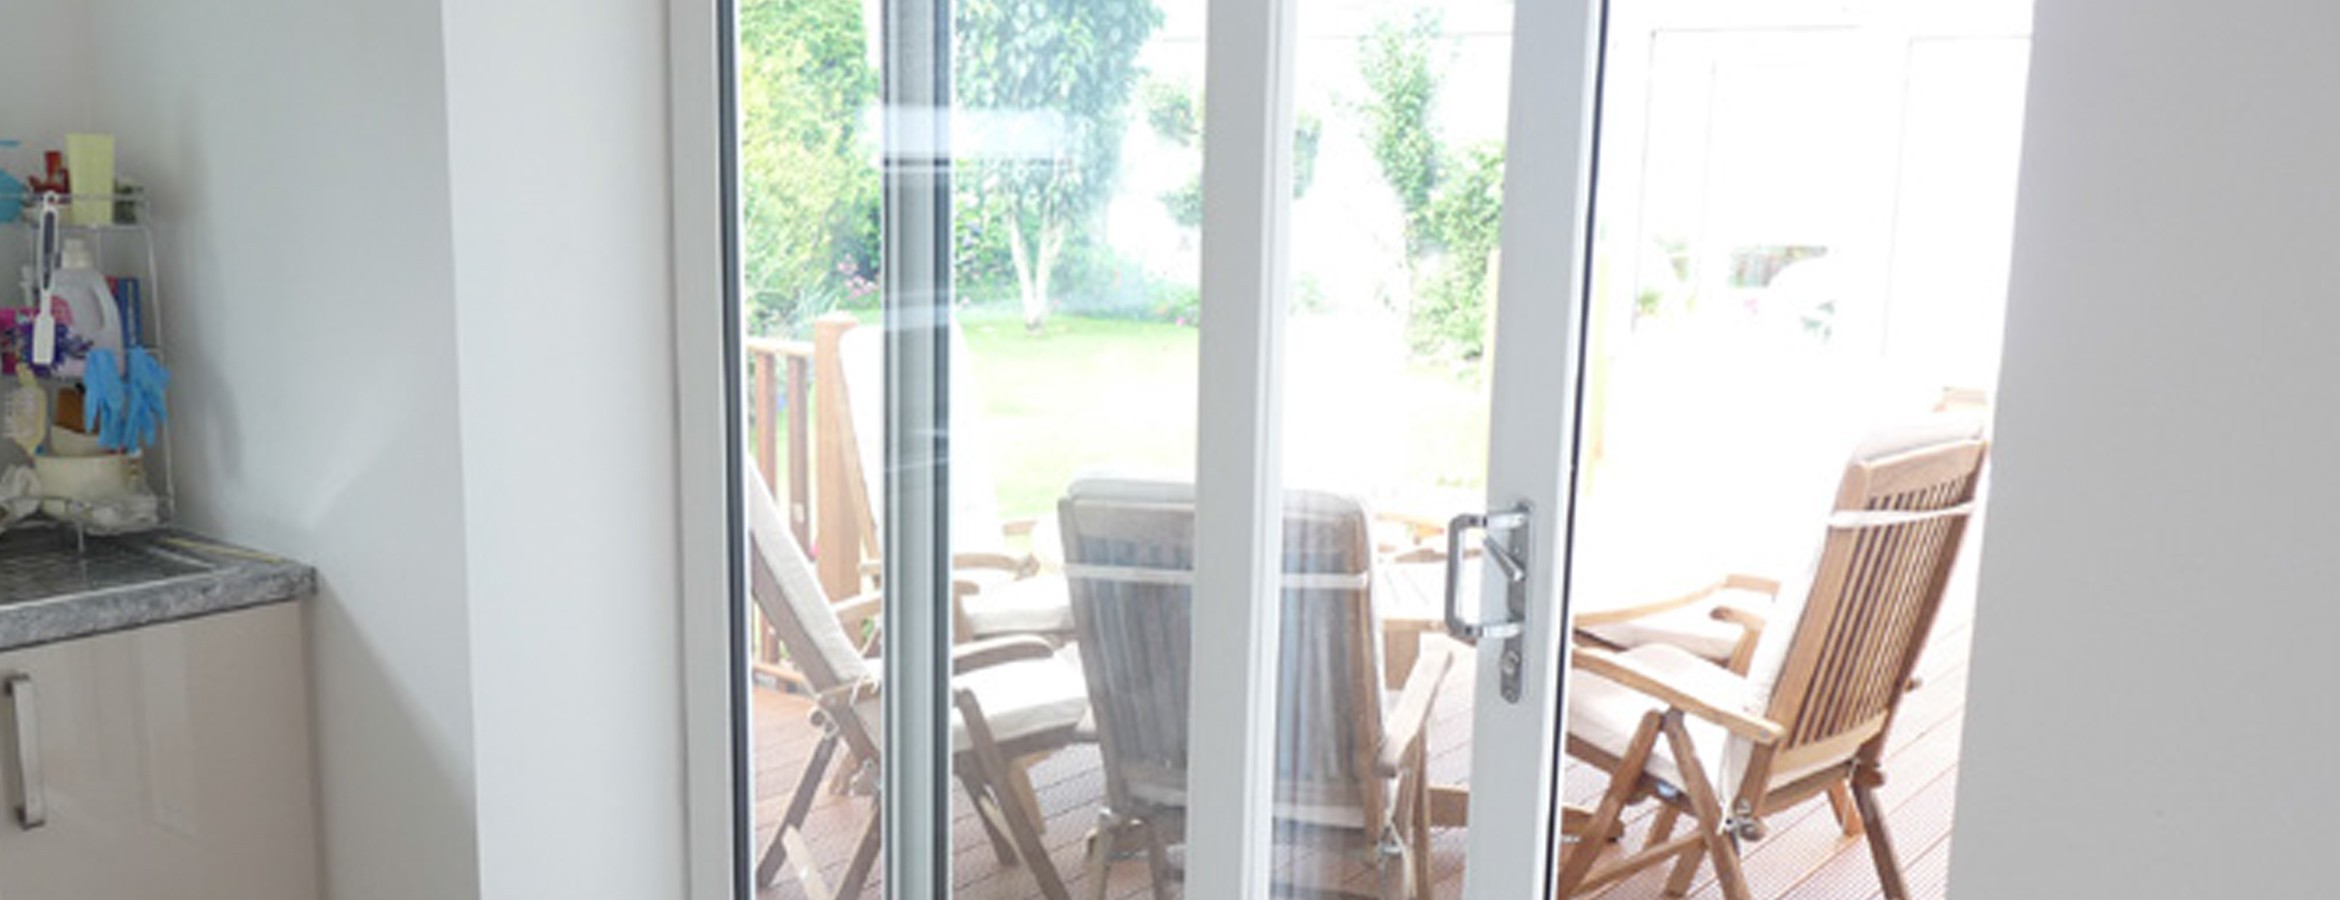 INTRUDER LOCK Patio Conservatory Double French Door Sliding